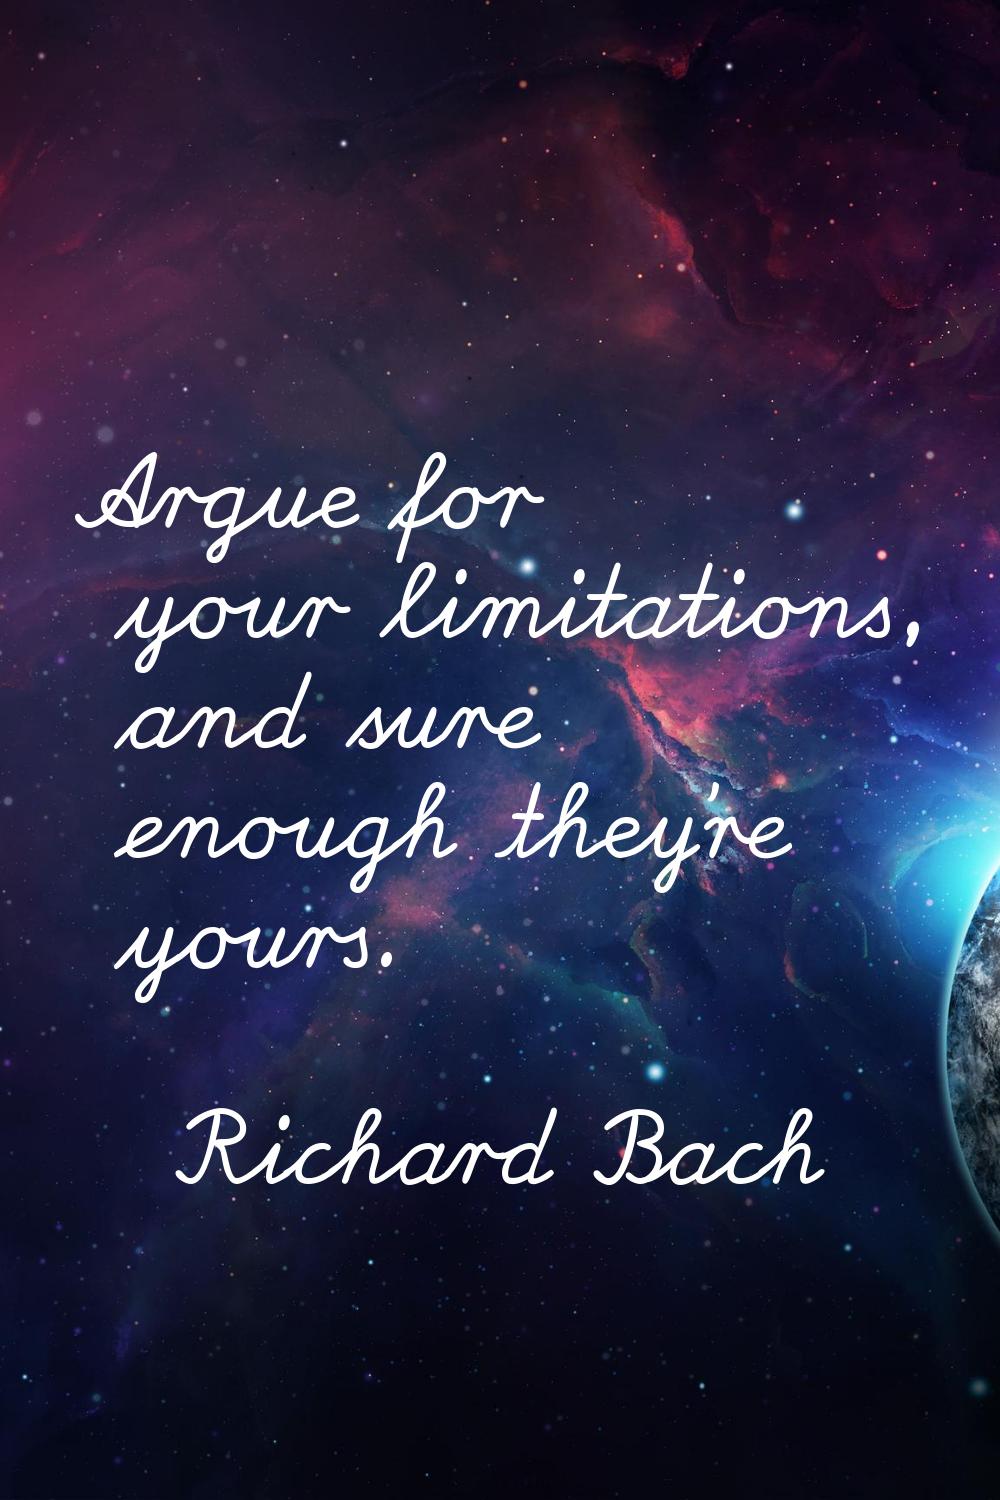 Argue for your limitations, and sure enough they're yours.